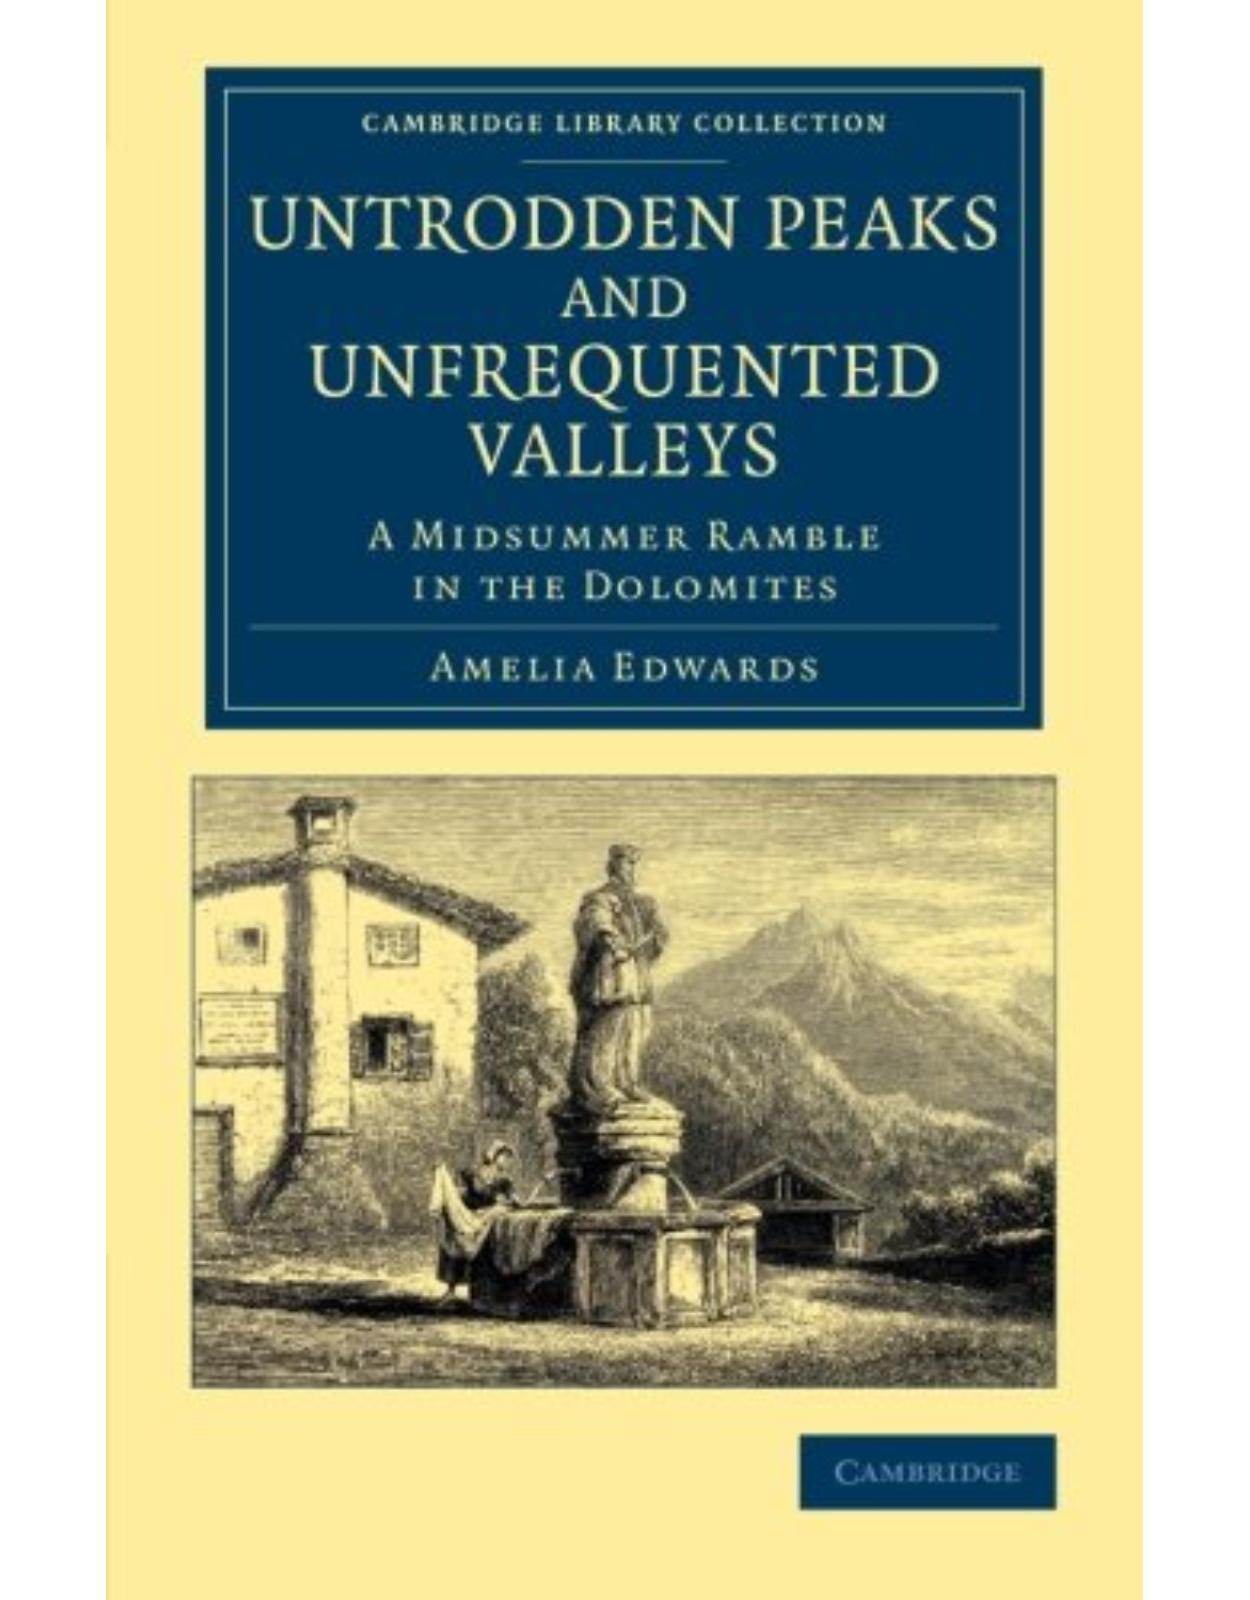 Untrodden Peaks and Unfrequented Valleys: A Midsummer Ramble in the Dolomites (Cambridge Library Collection - Travel, Europe)